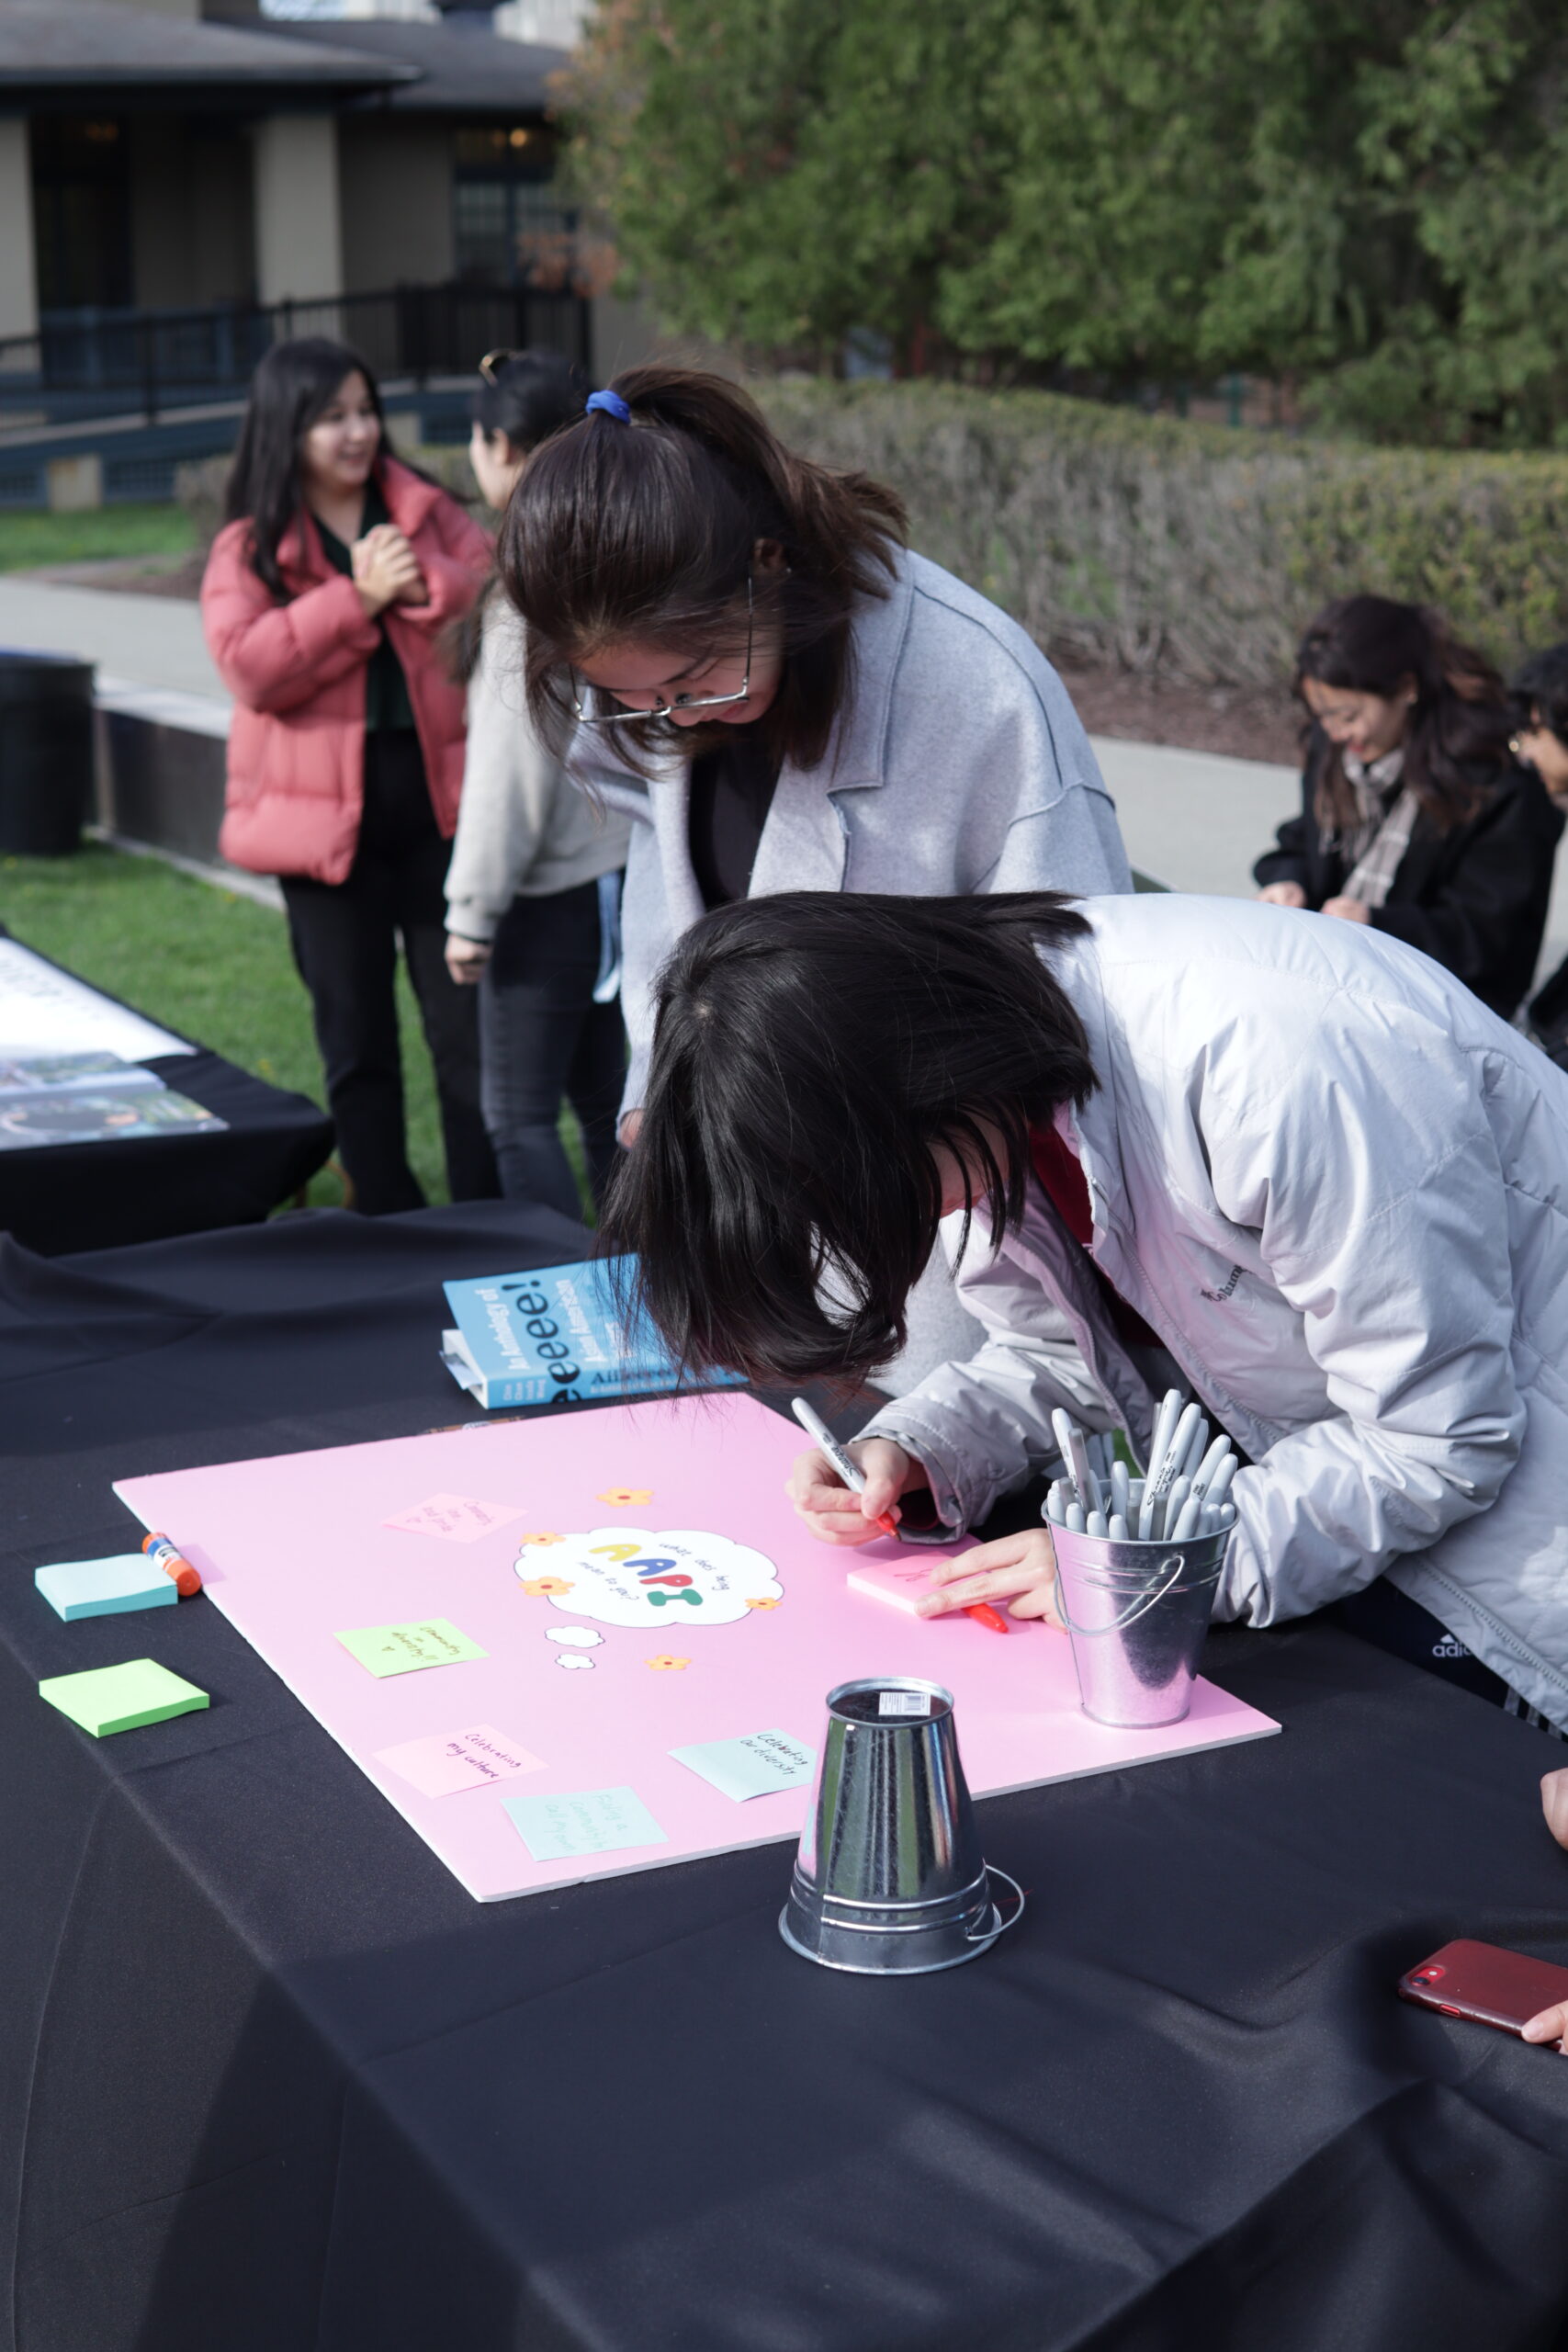 Two students with their heads down; one student is looking at the pink "What does being AAPI mean to you?" poster, while the other student is writing on a post it.  